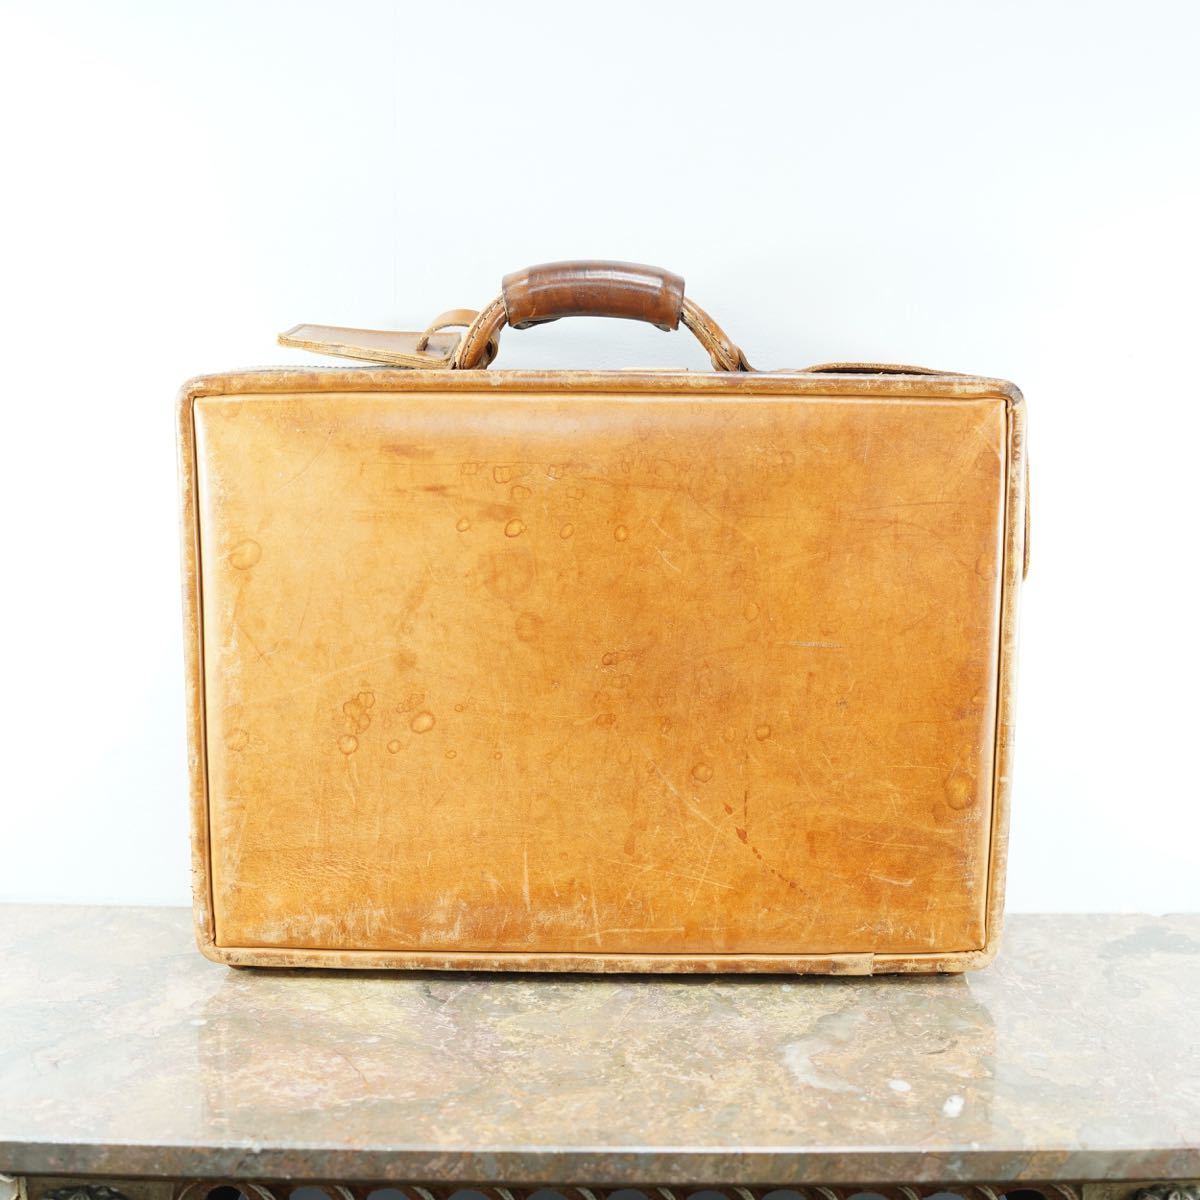 USA VINTAGE hartmann luggage LEATHER BUSINESS BAG/アメリカ古着ハートマンラゲージレザービジネスバッグ